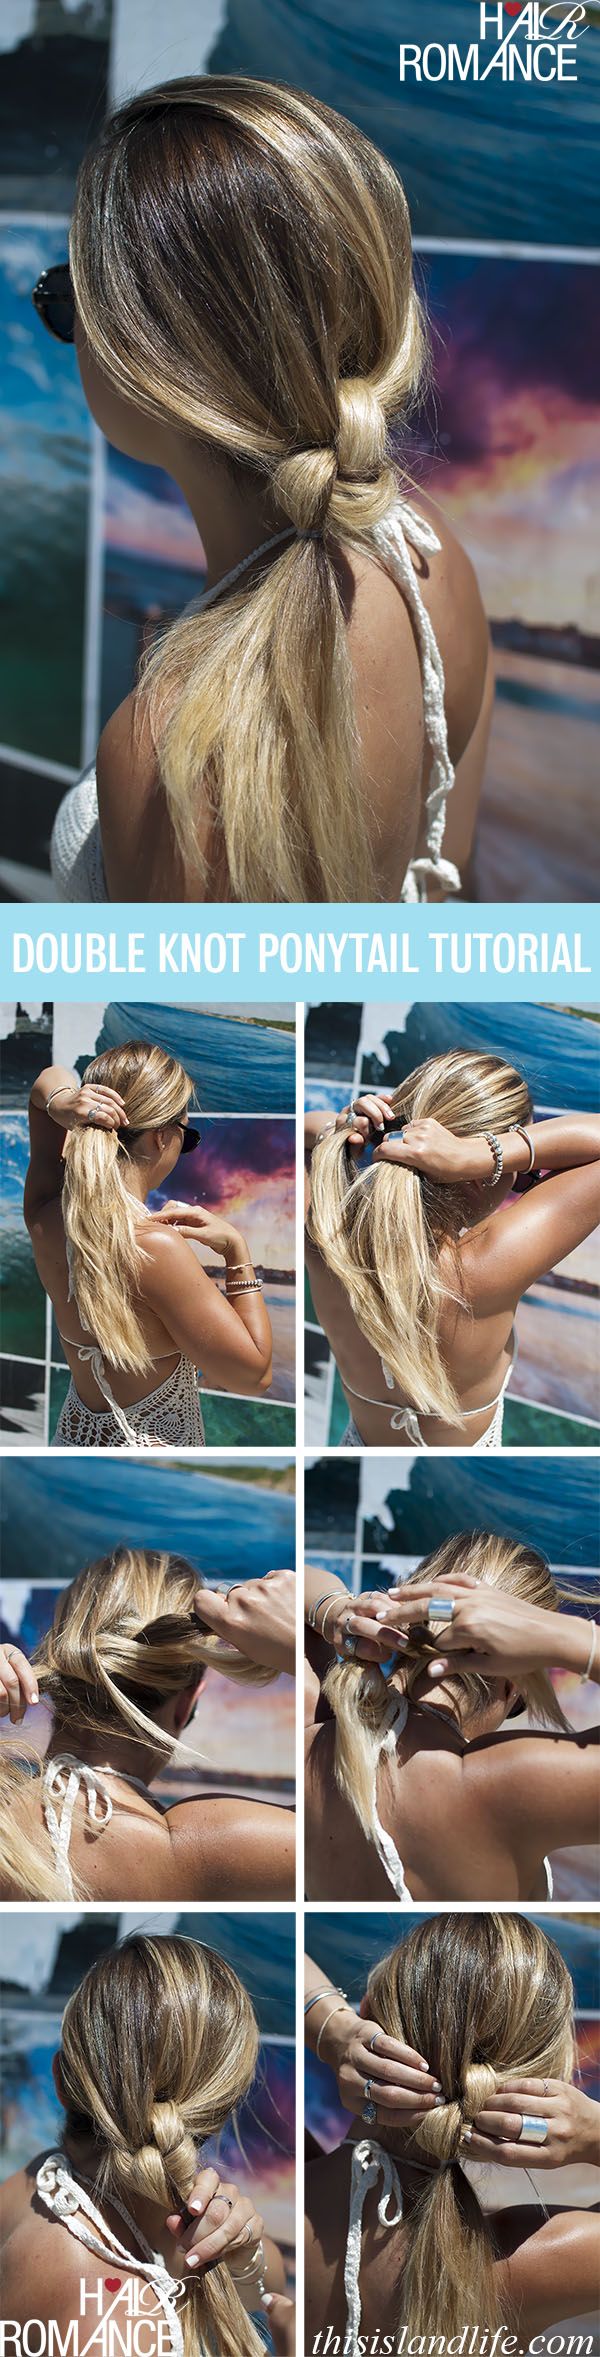 Double knot ponytail tutorial